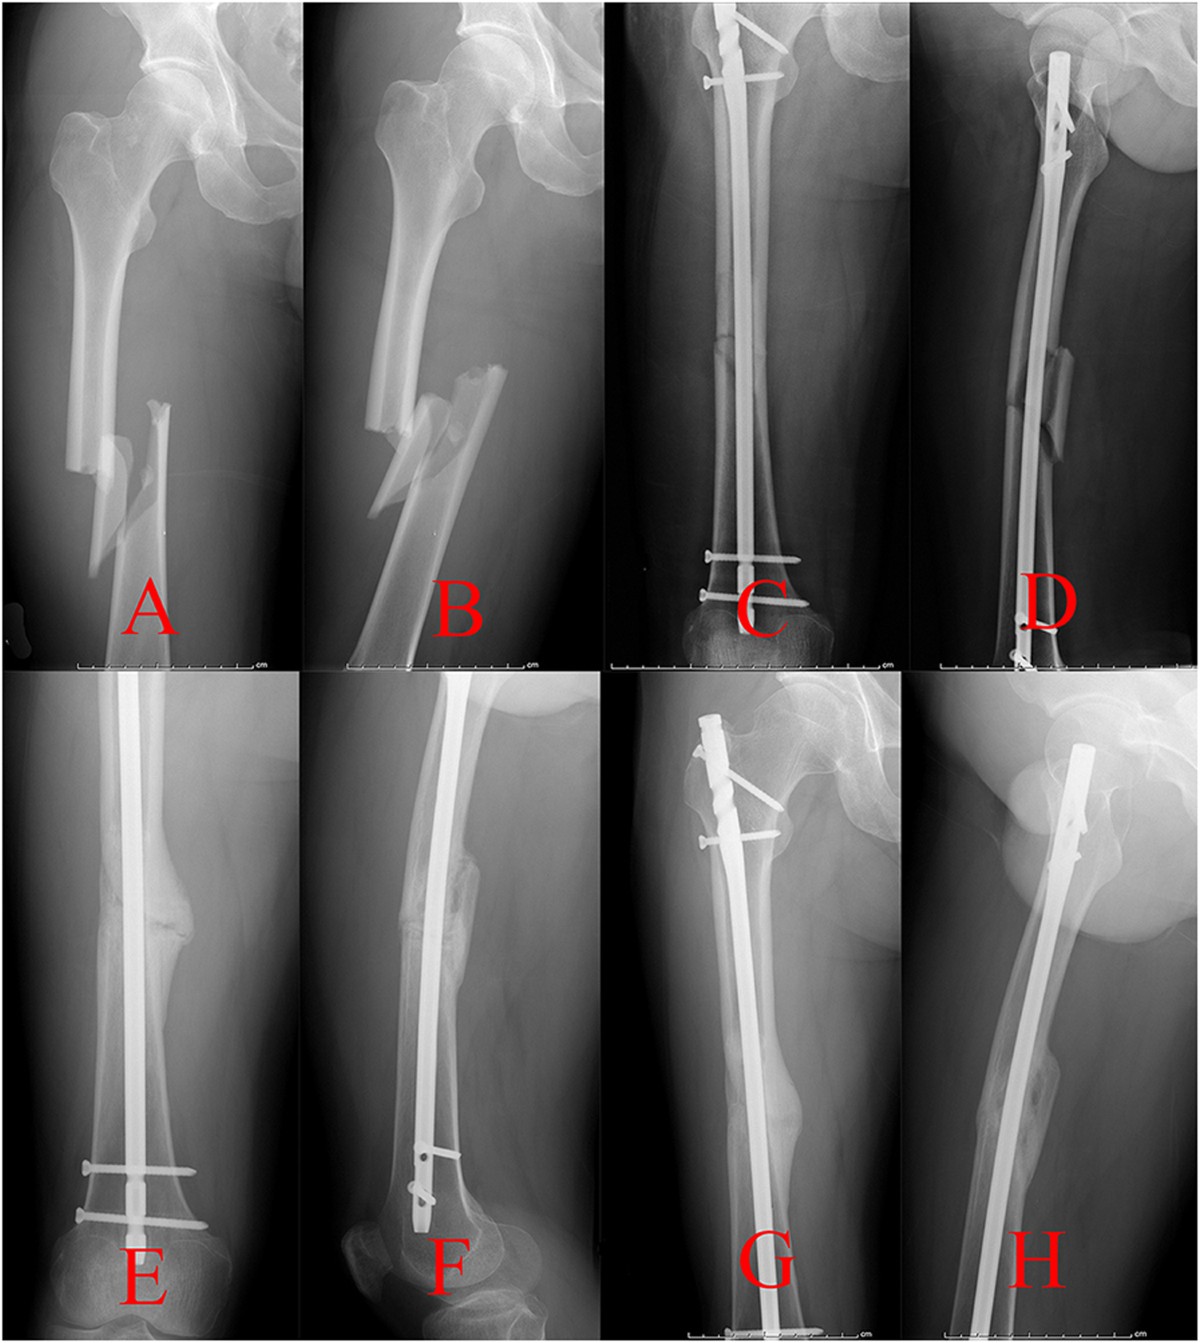 PDF) Antegrade Versus Retrograde Locked Intramedullary Nailing for Femoral  Fractures: Which Is Better? | Vivek A/L Ajit Singh - Academia.edu